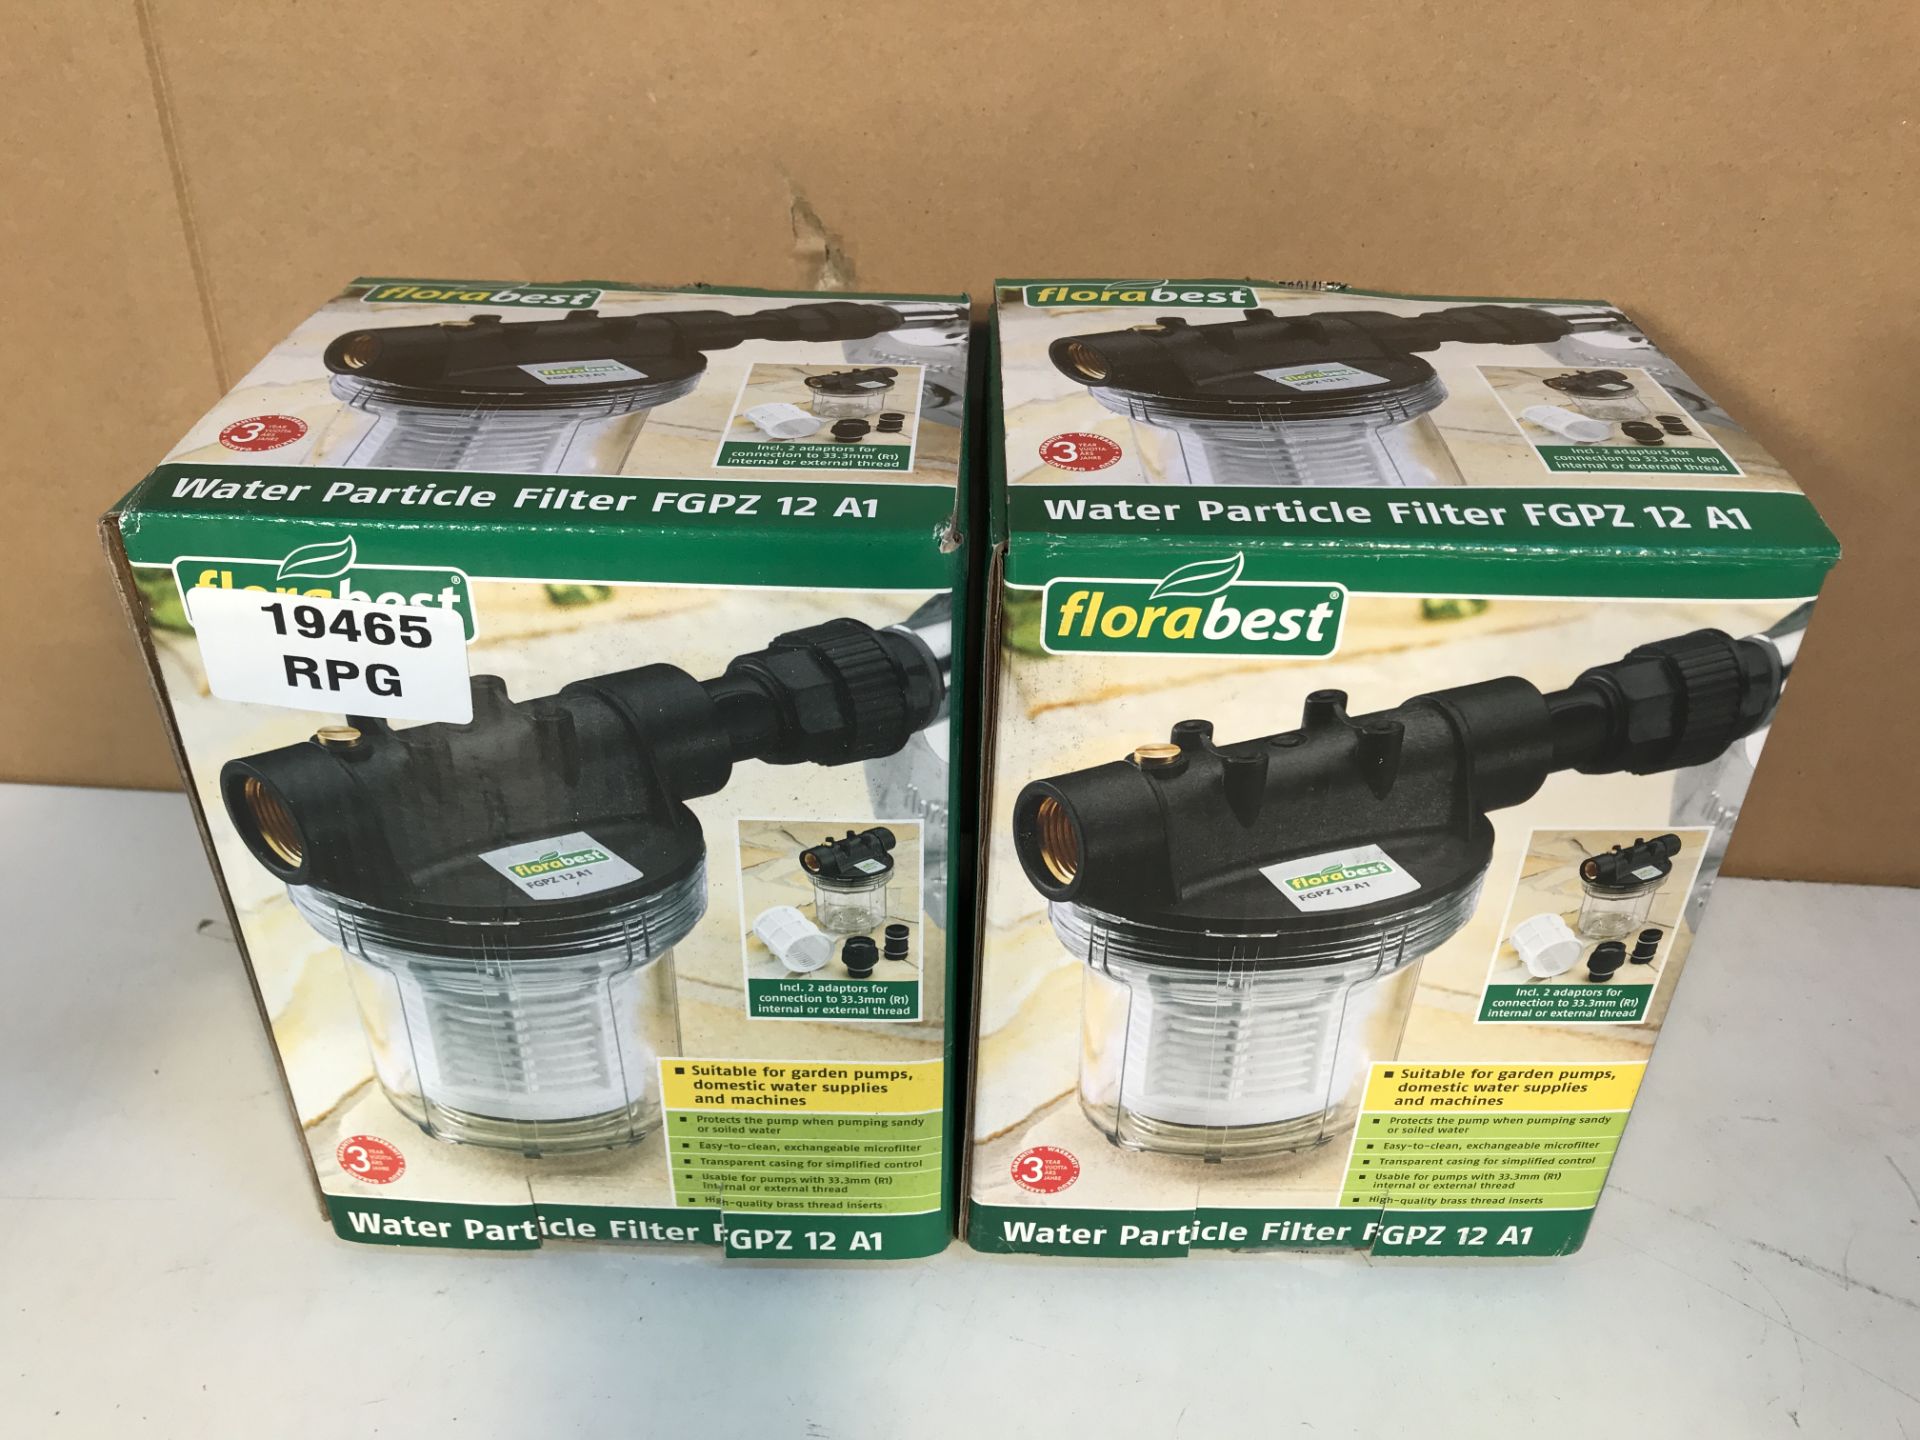 2 x Florabest Water Particle Filter FGPZ 12 A1